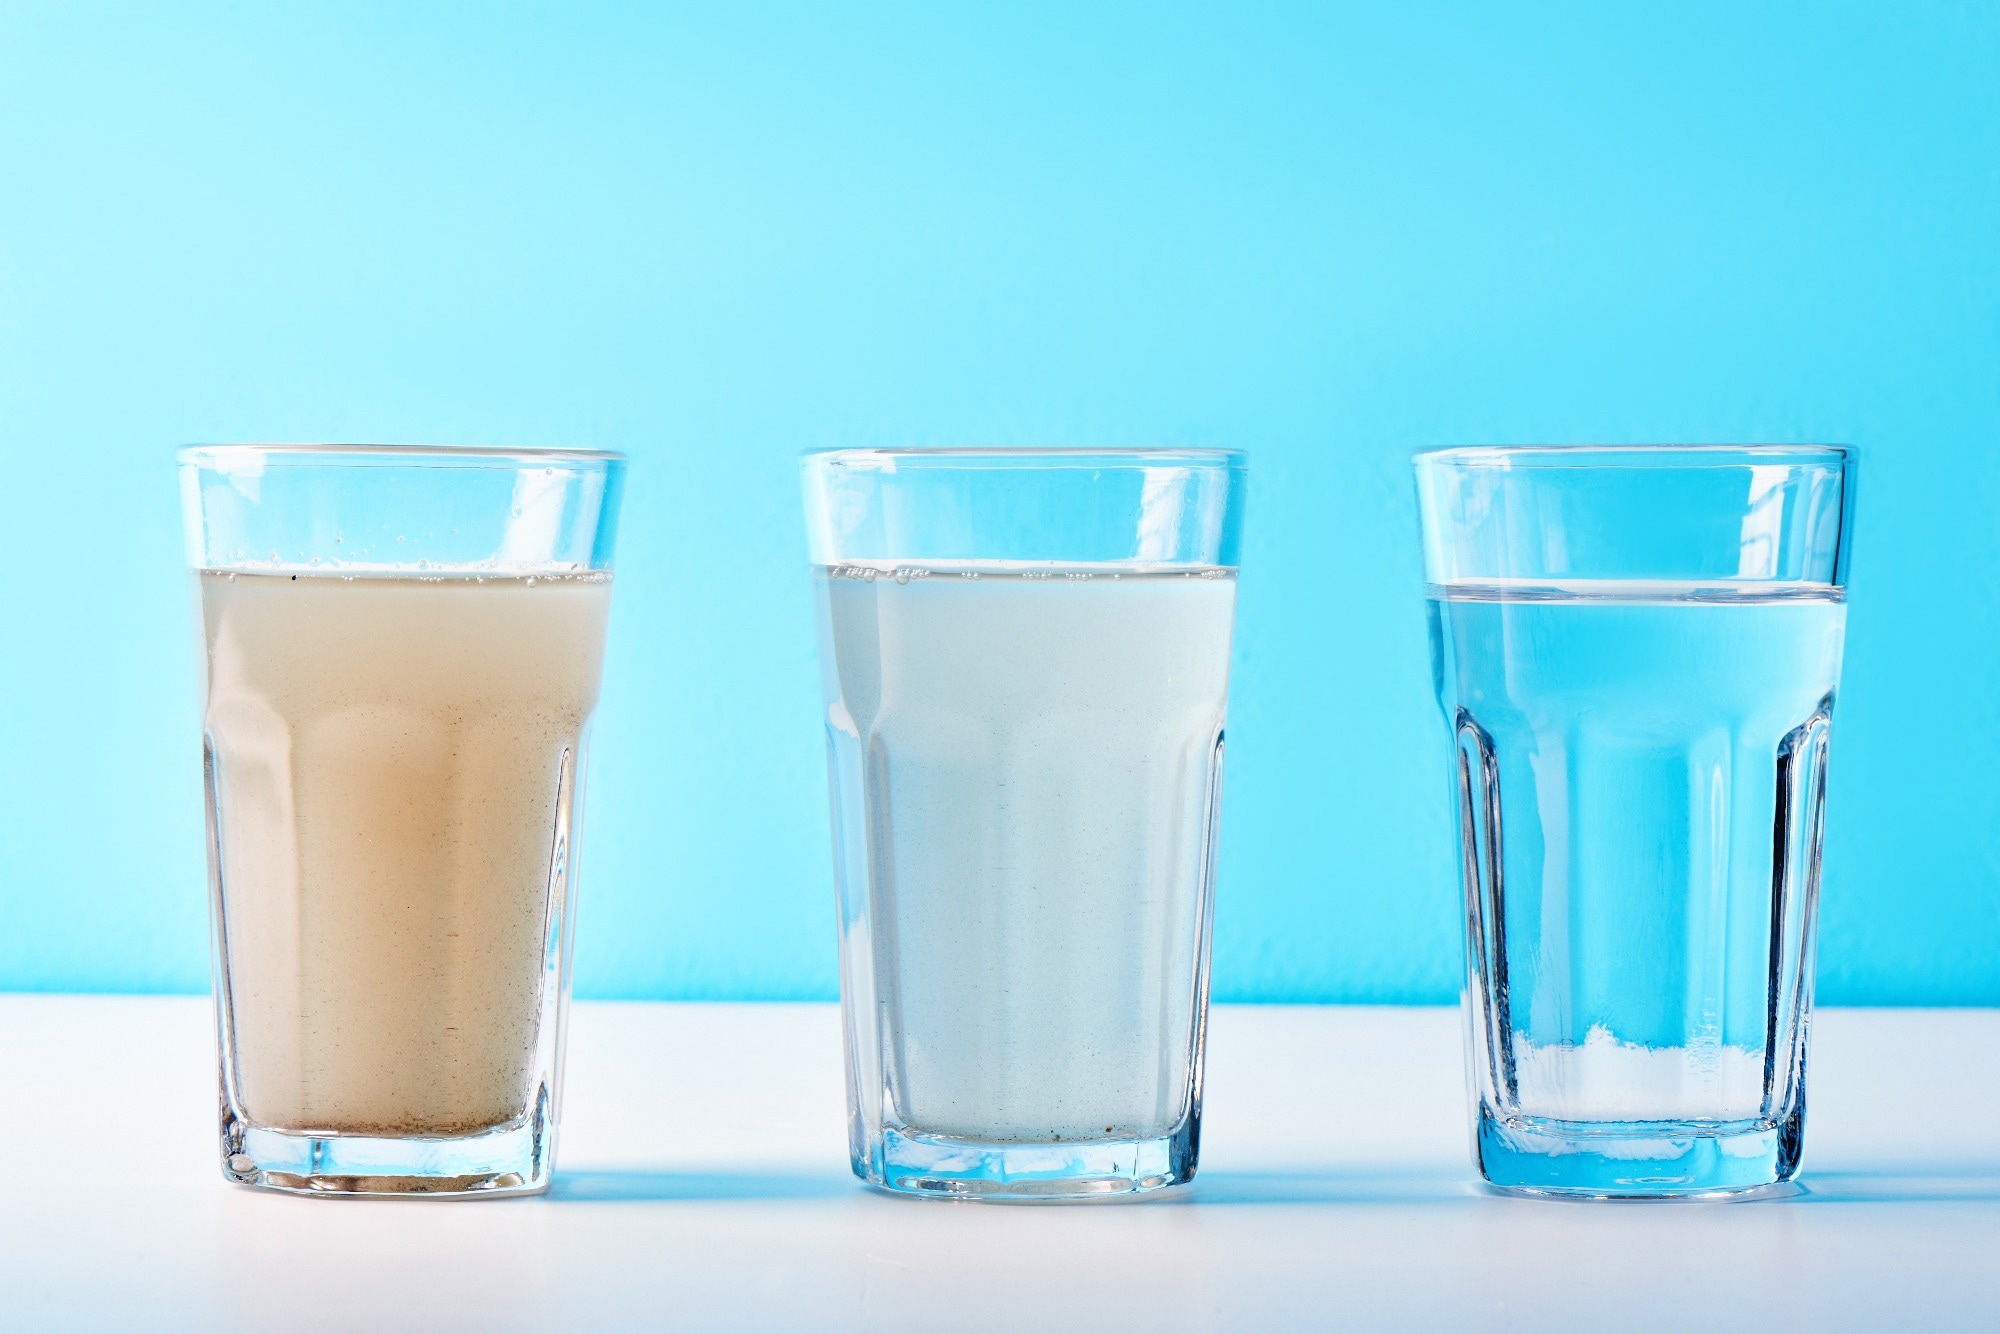 High-Performing Low Cost Water Filtration Systems.